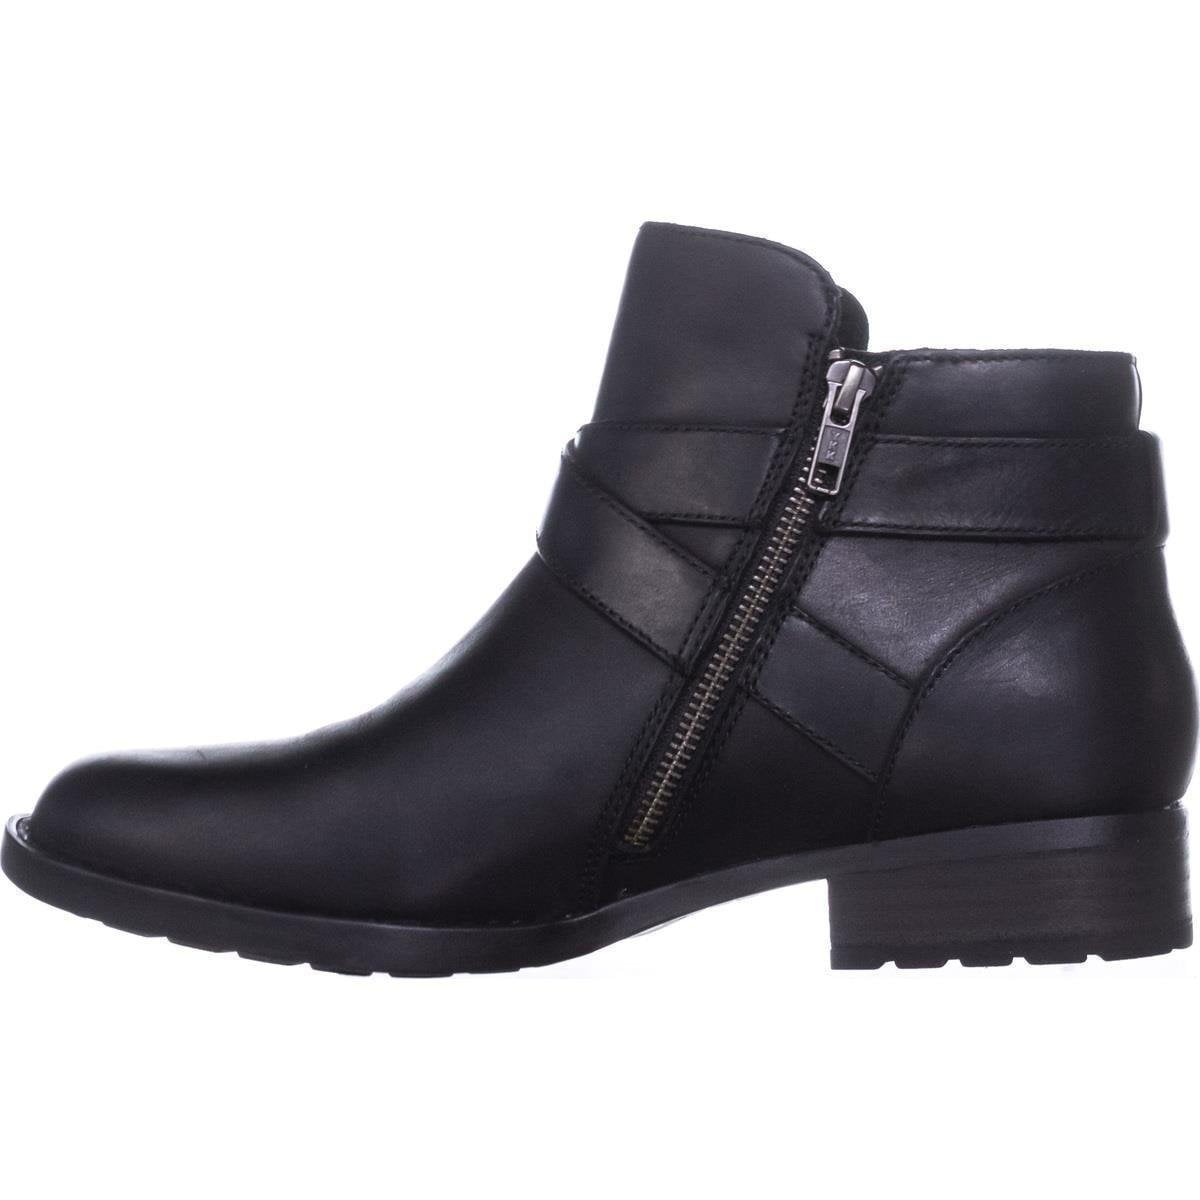 BORN Womens Chaval Leather Closed Toe Ankle Fashion Boots,